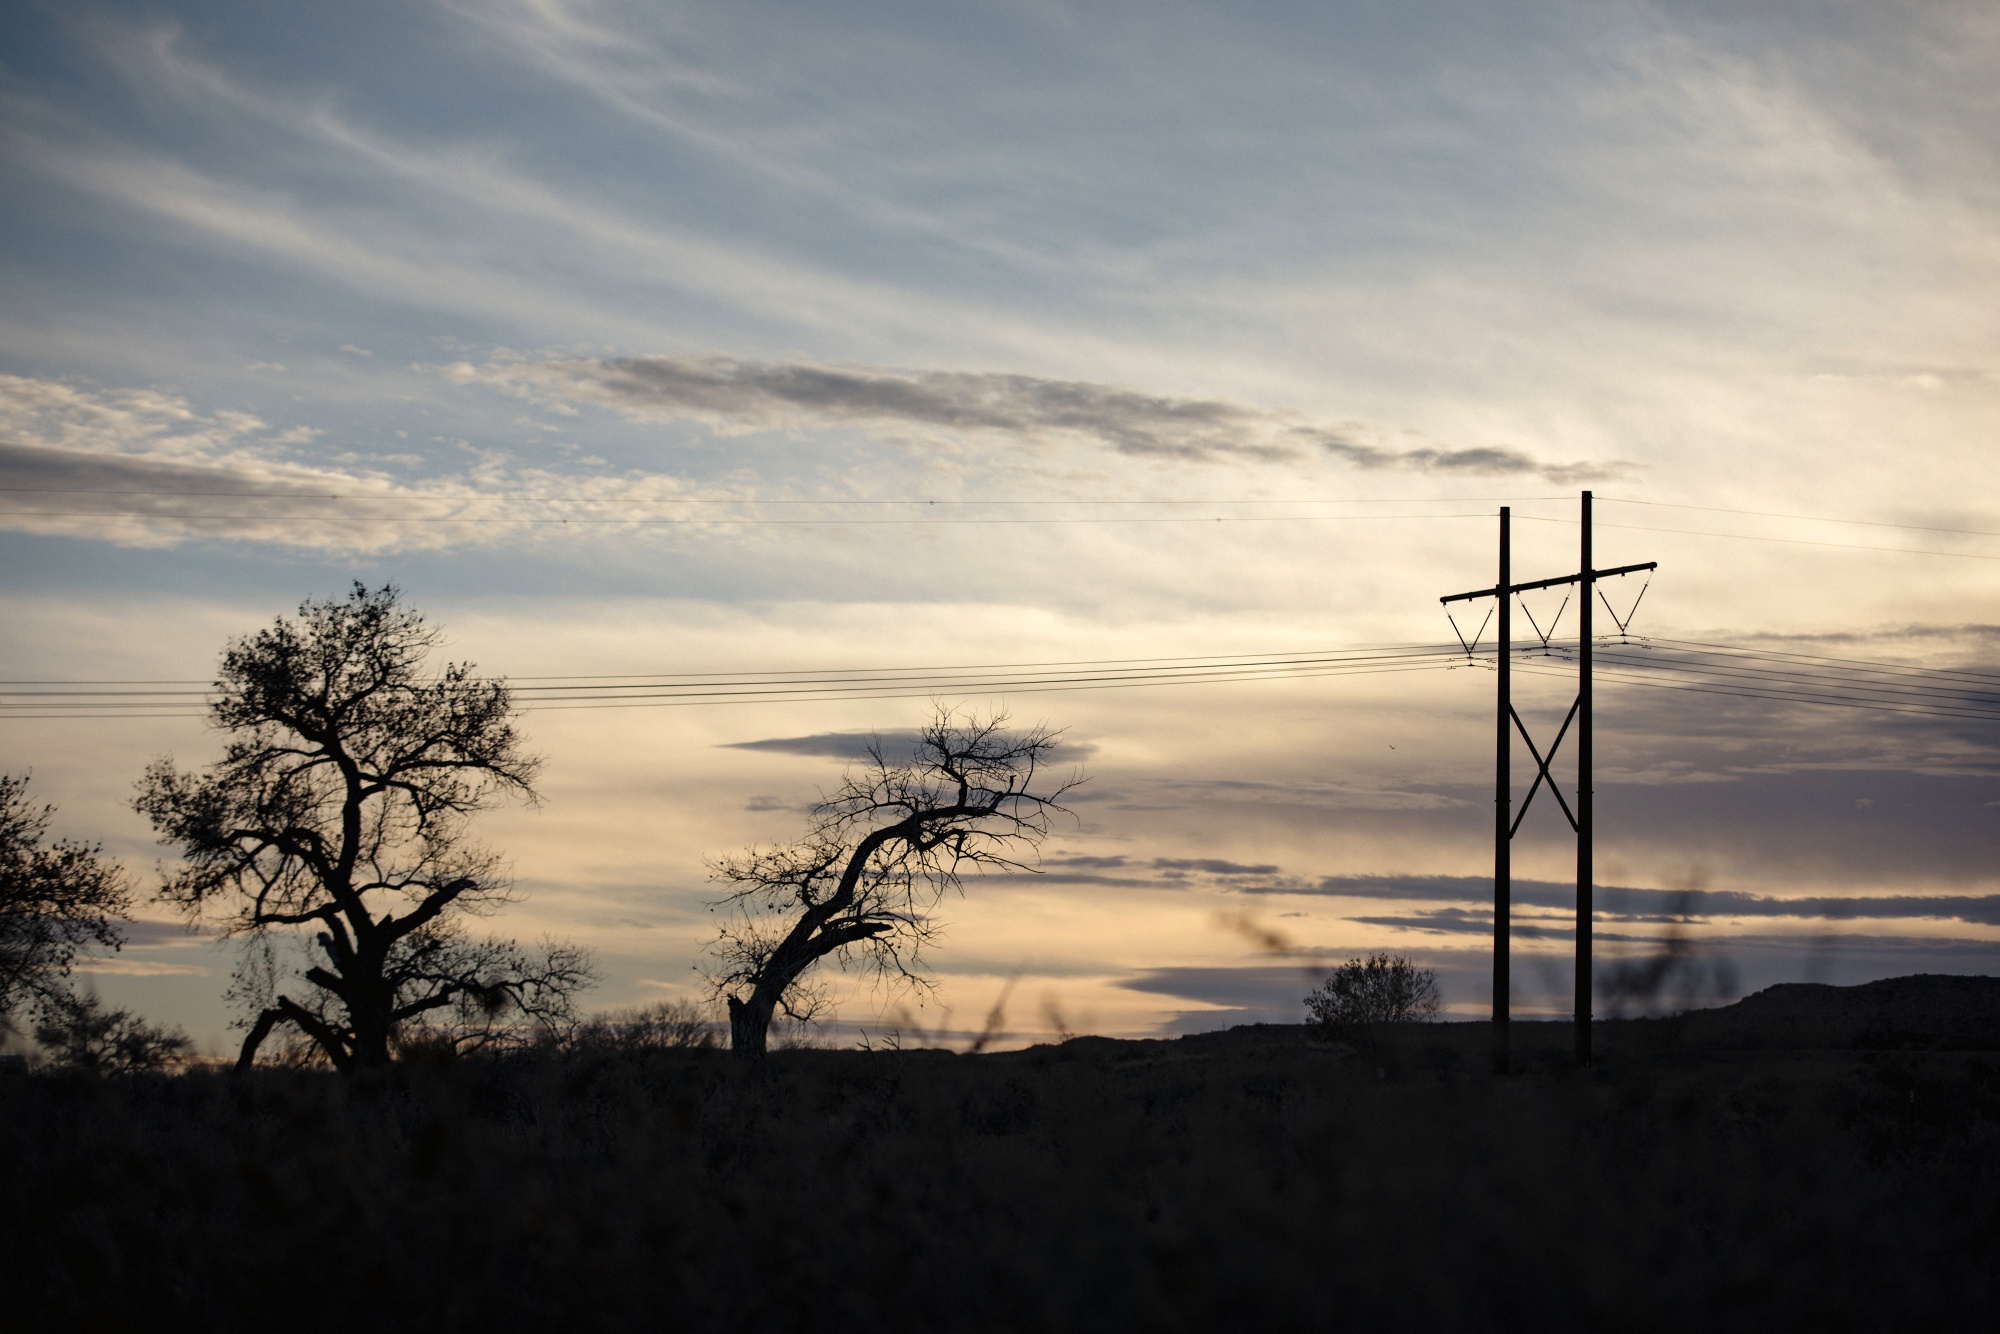 Western Spirit transmission lines tower above the interstate and farmlands in Bosque, NM on January 14, 2023.